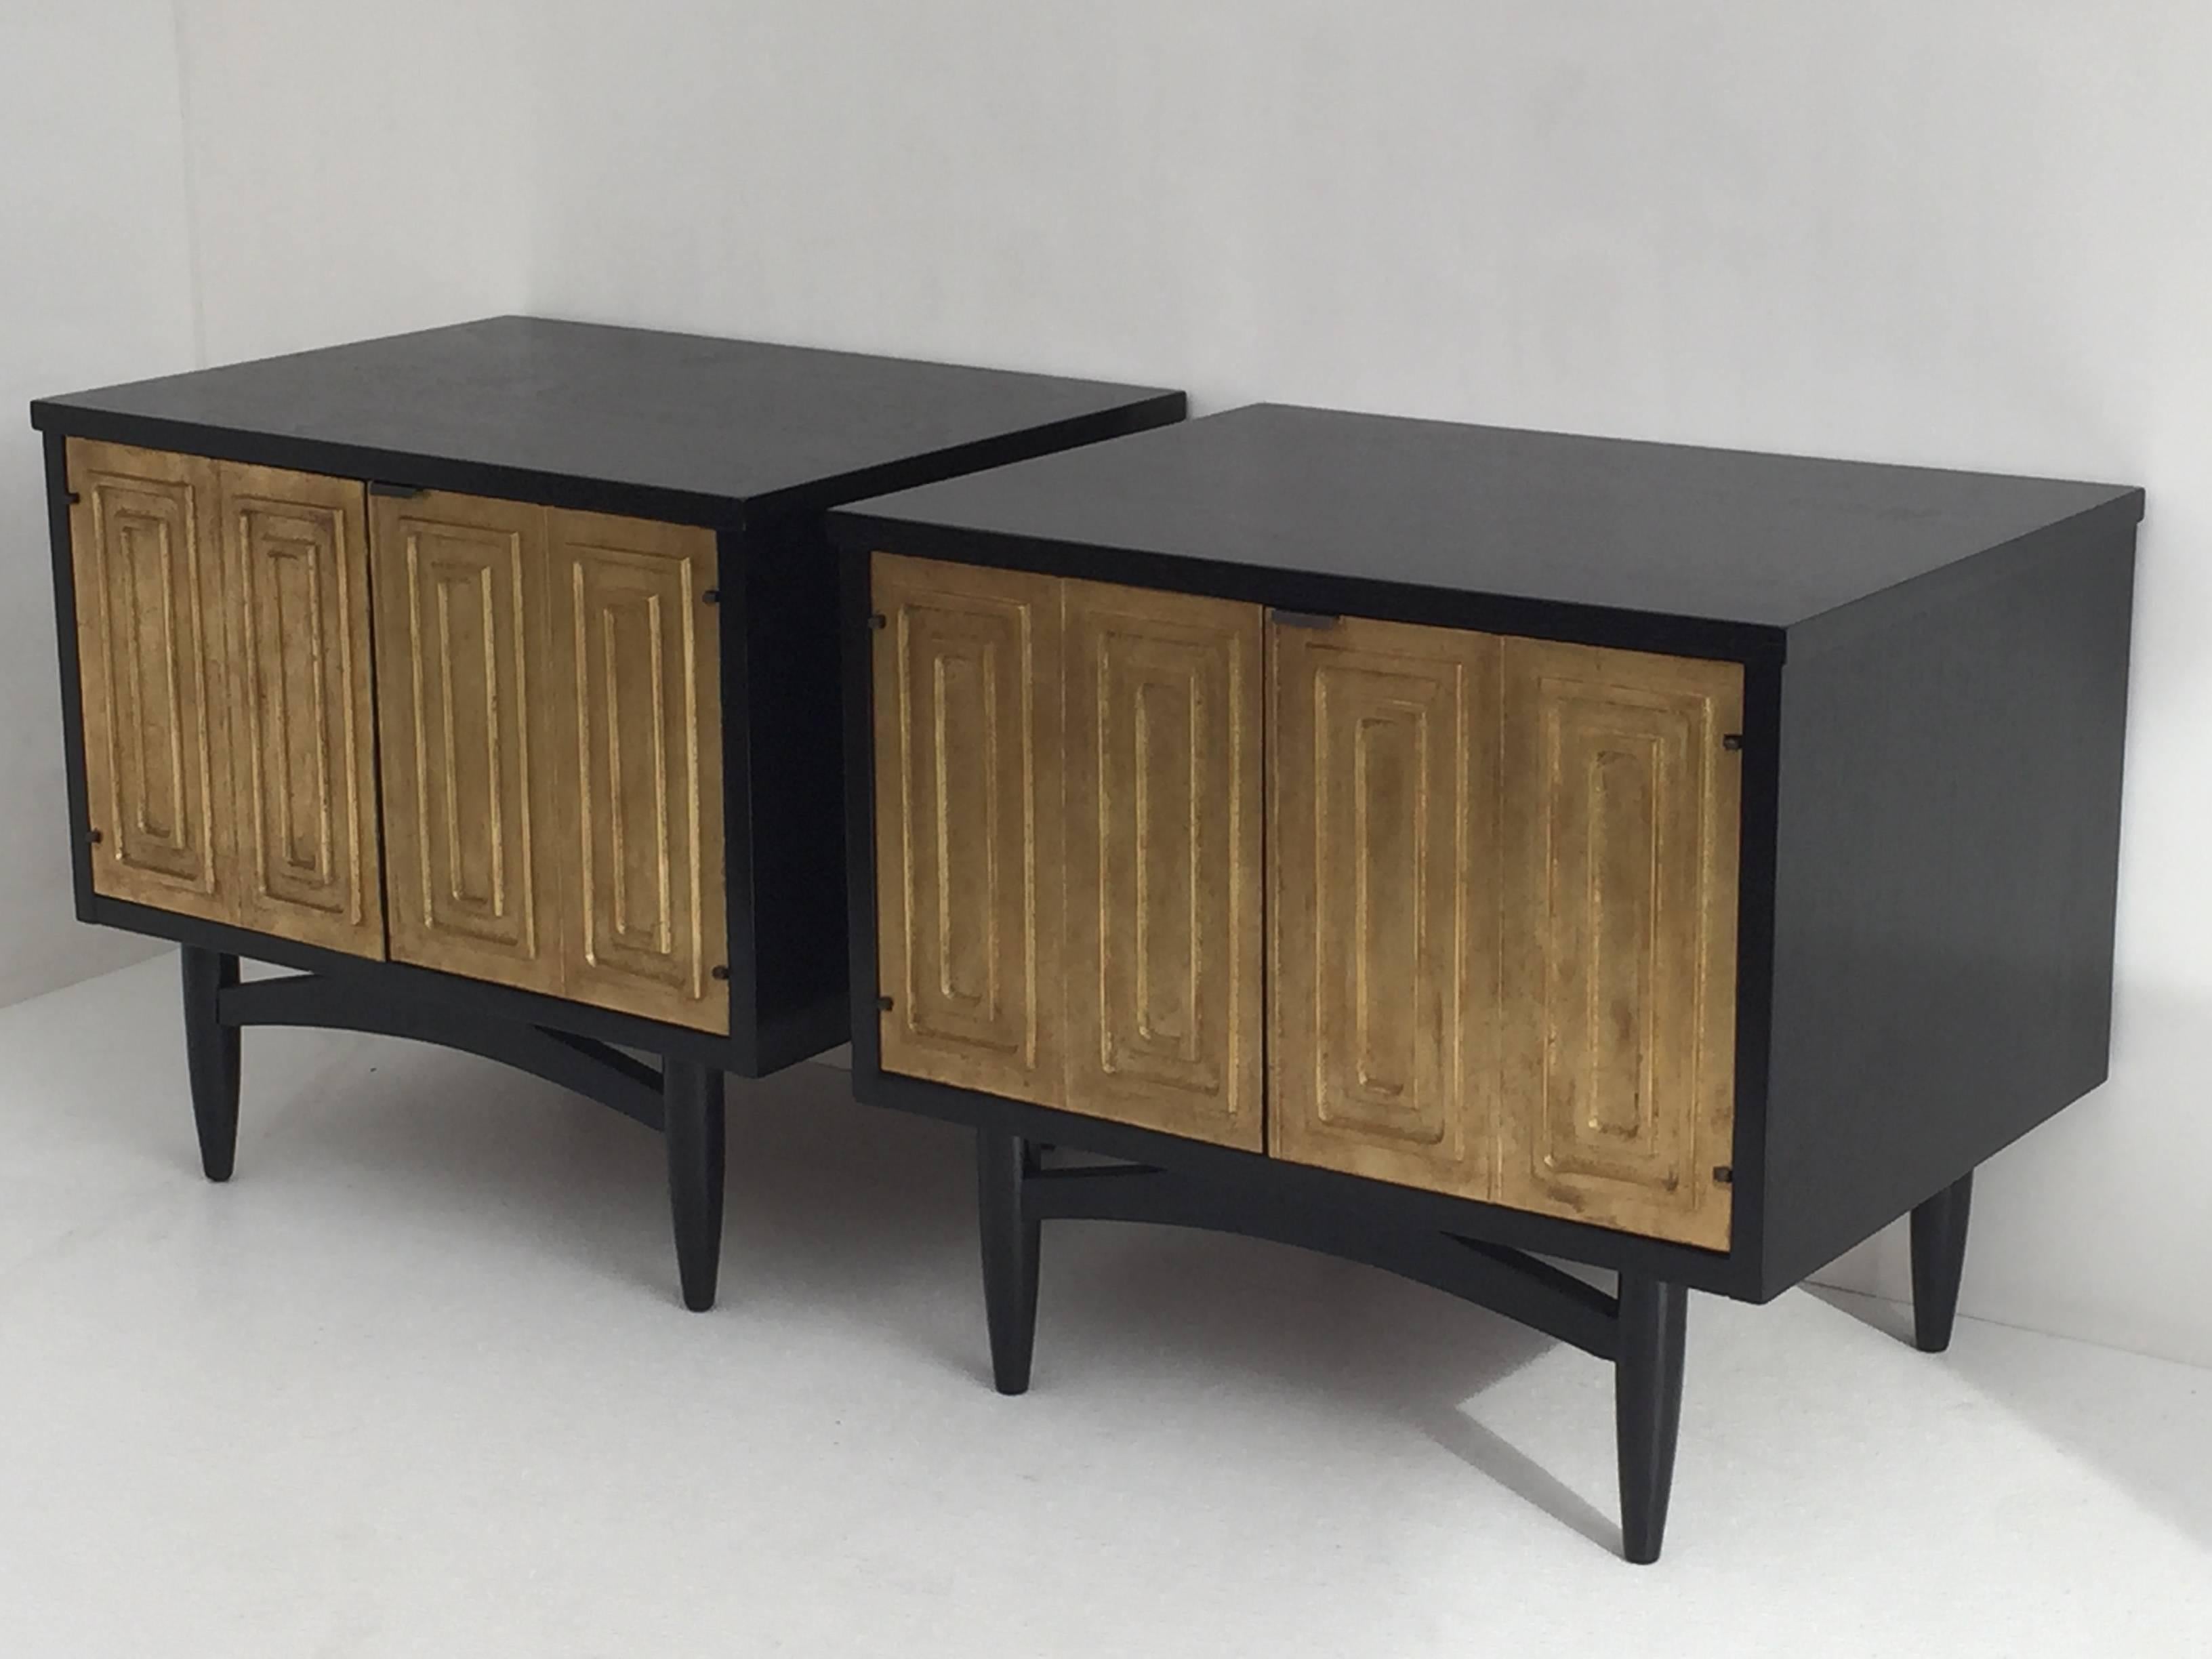 Pair of mid century modern petite ebonized and gold leafed nightstands